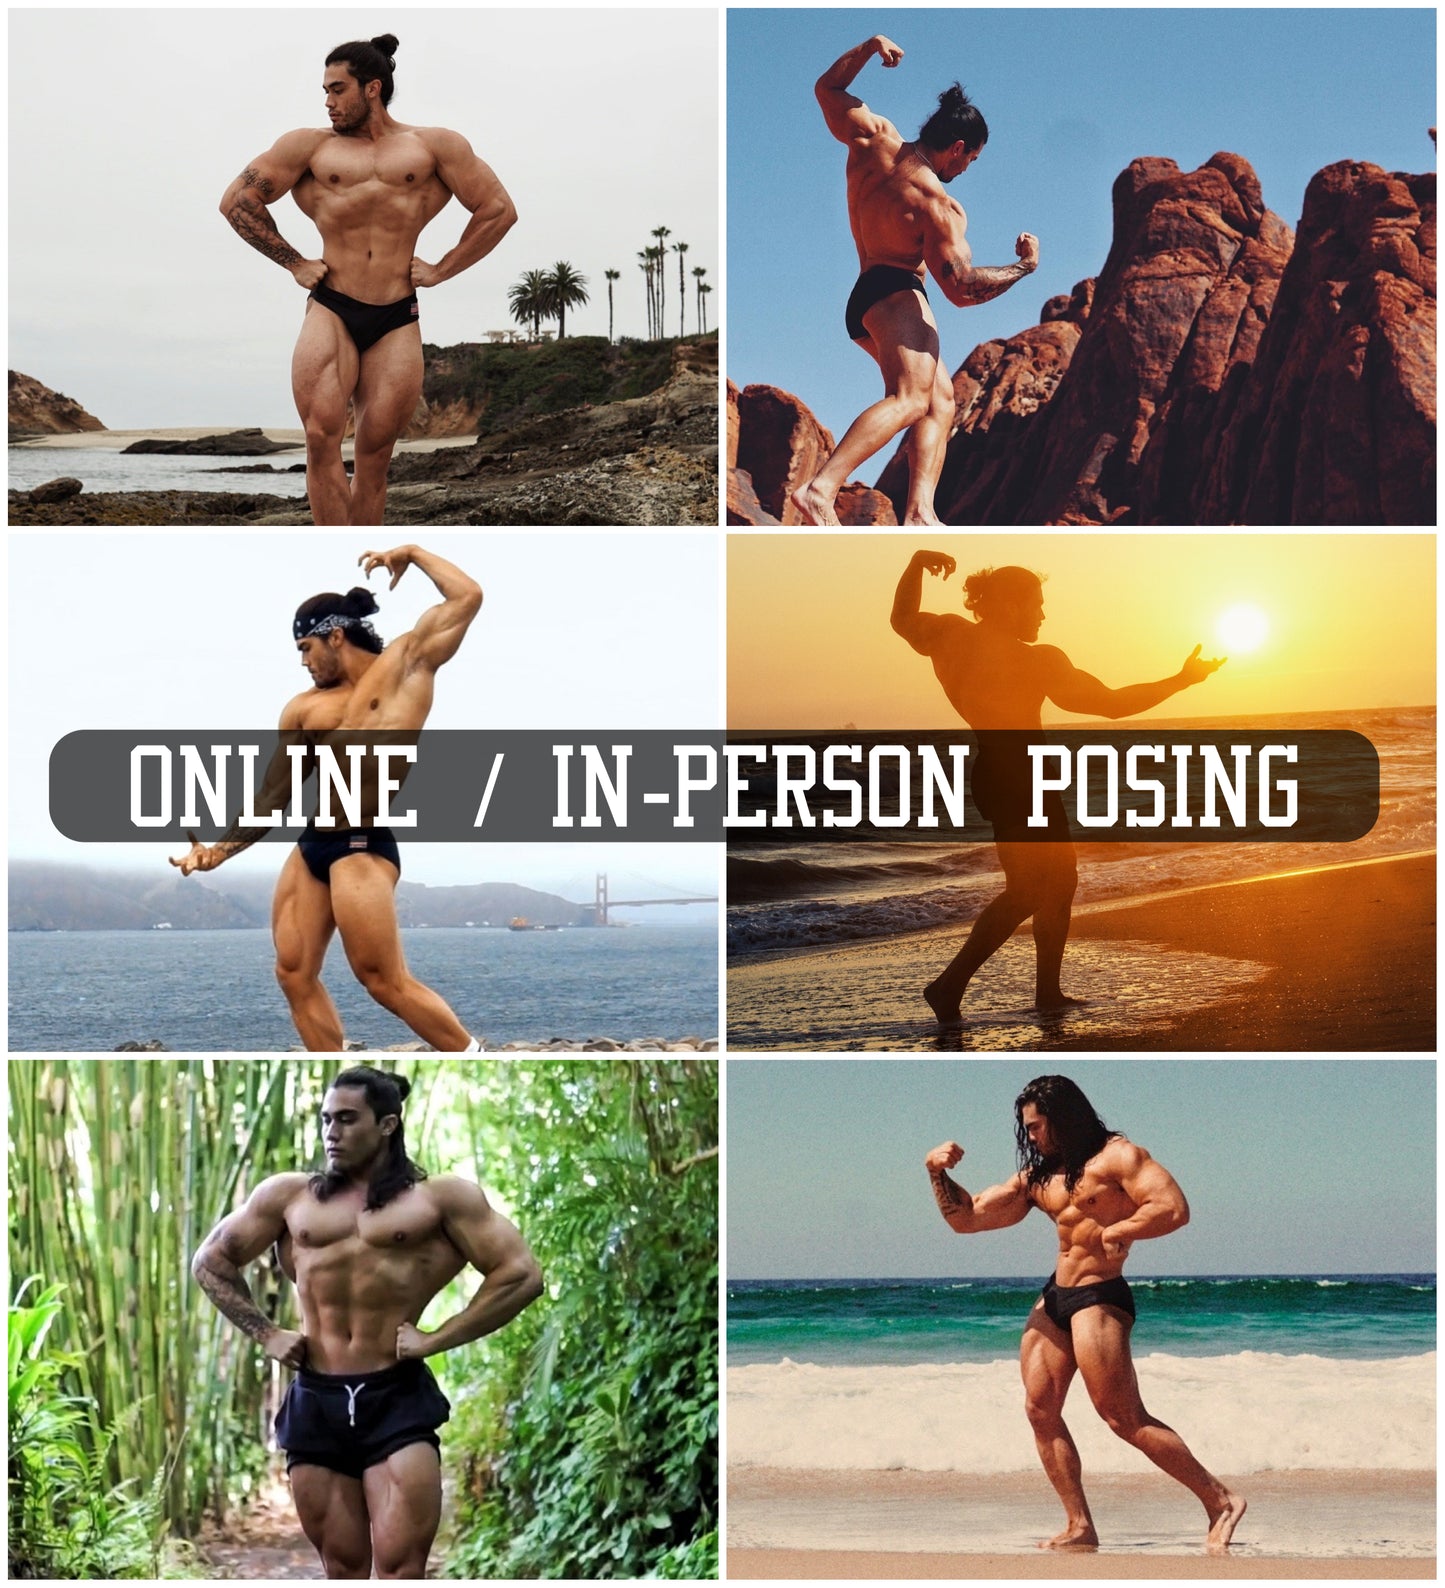 1-ON-1 ONLINE OR IN PERSON POSING